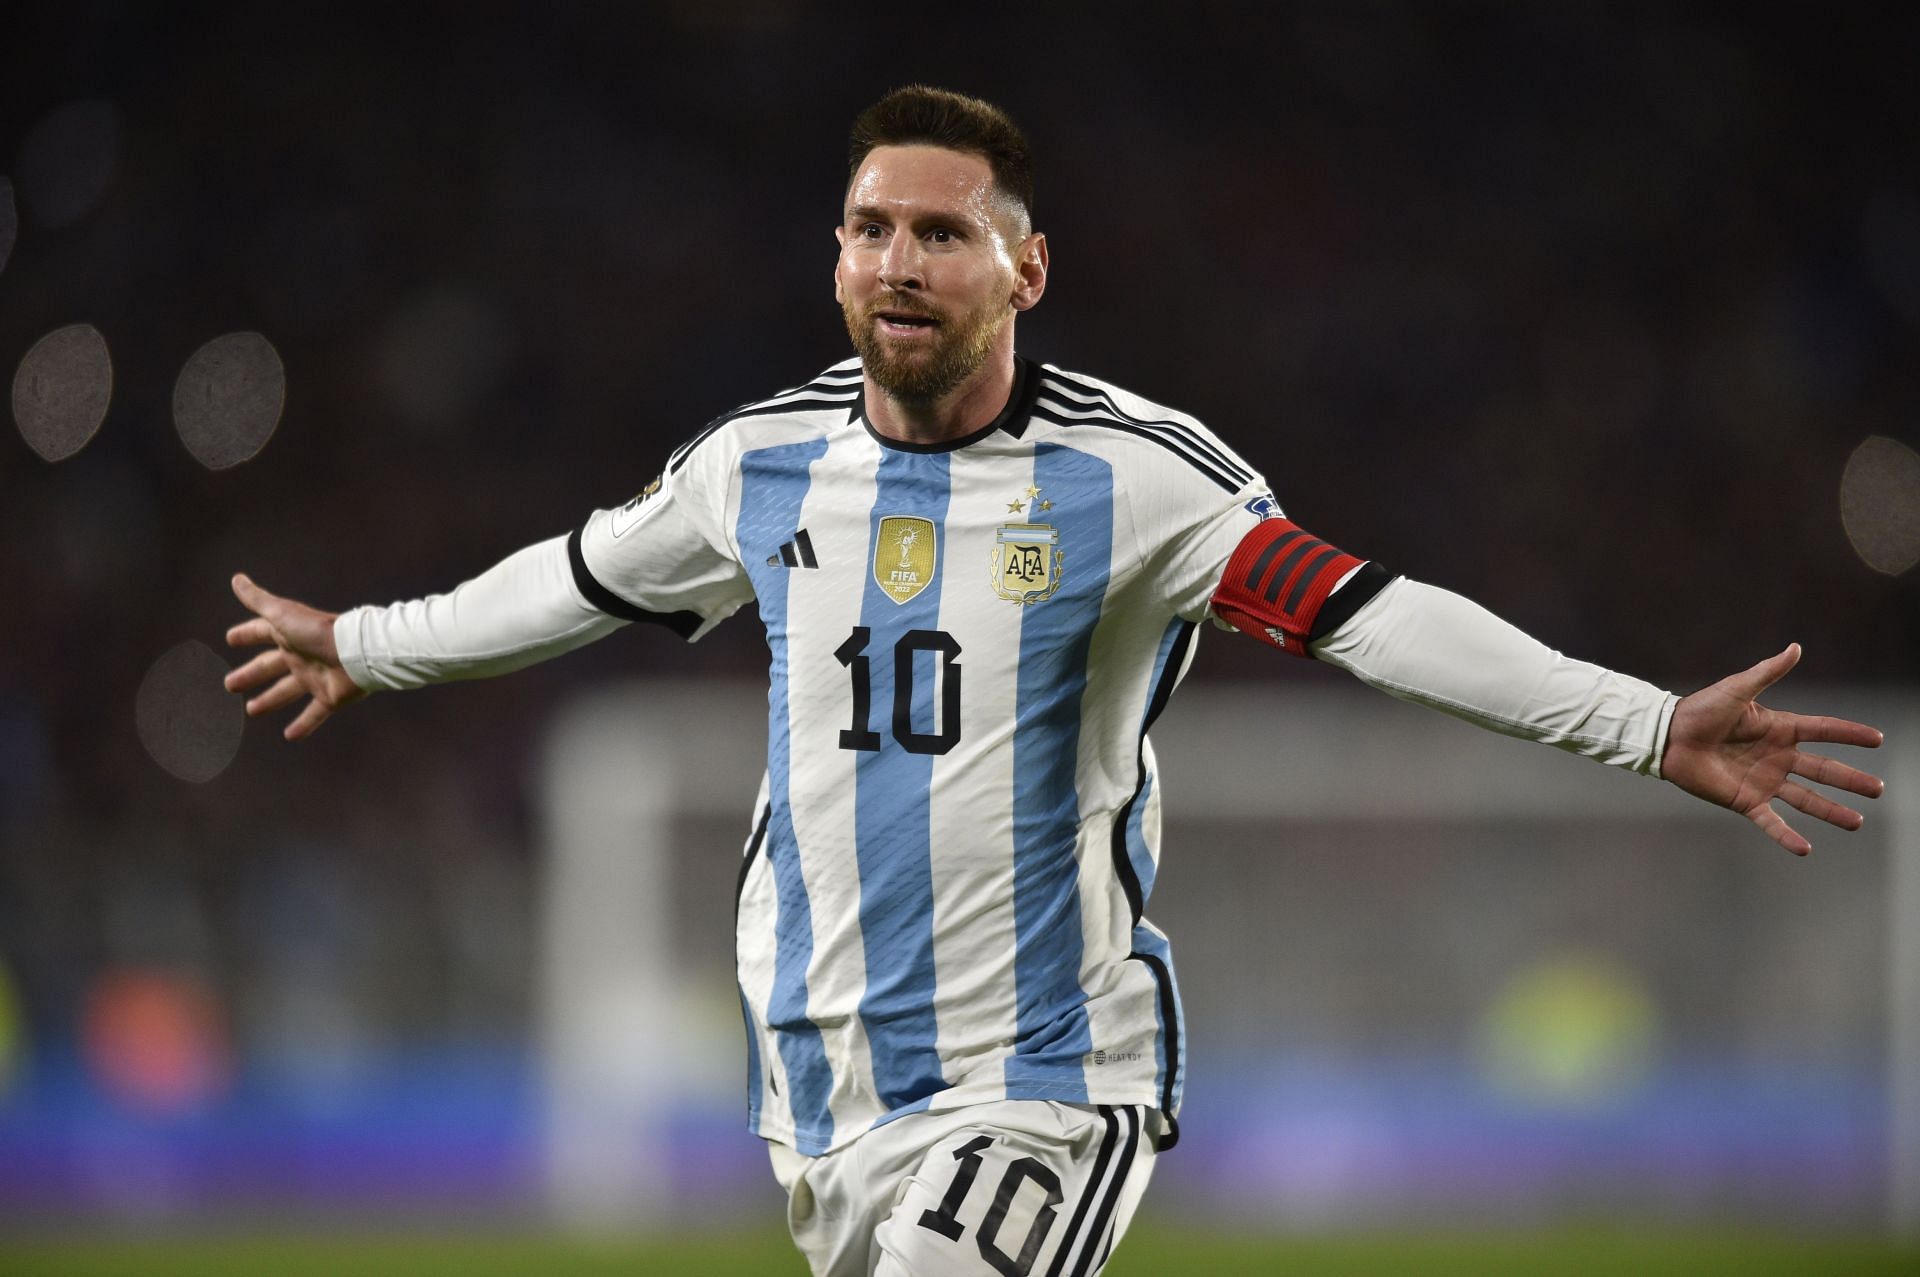 Lionel Messi is in pole position to claim the award